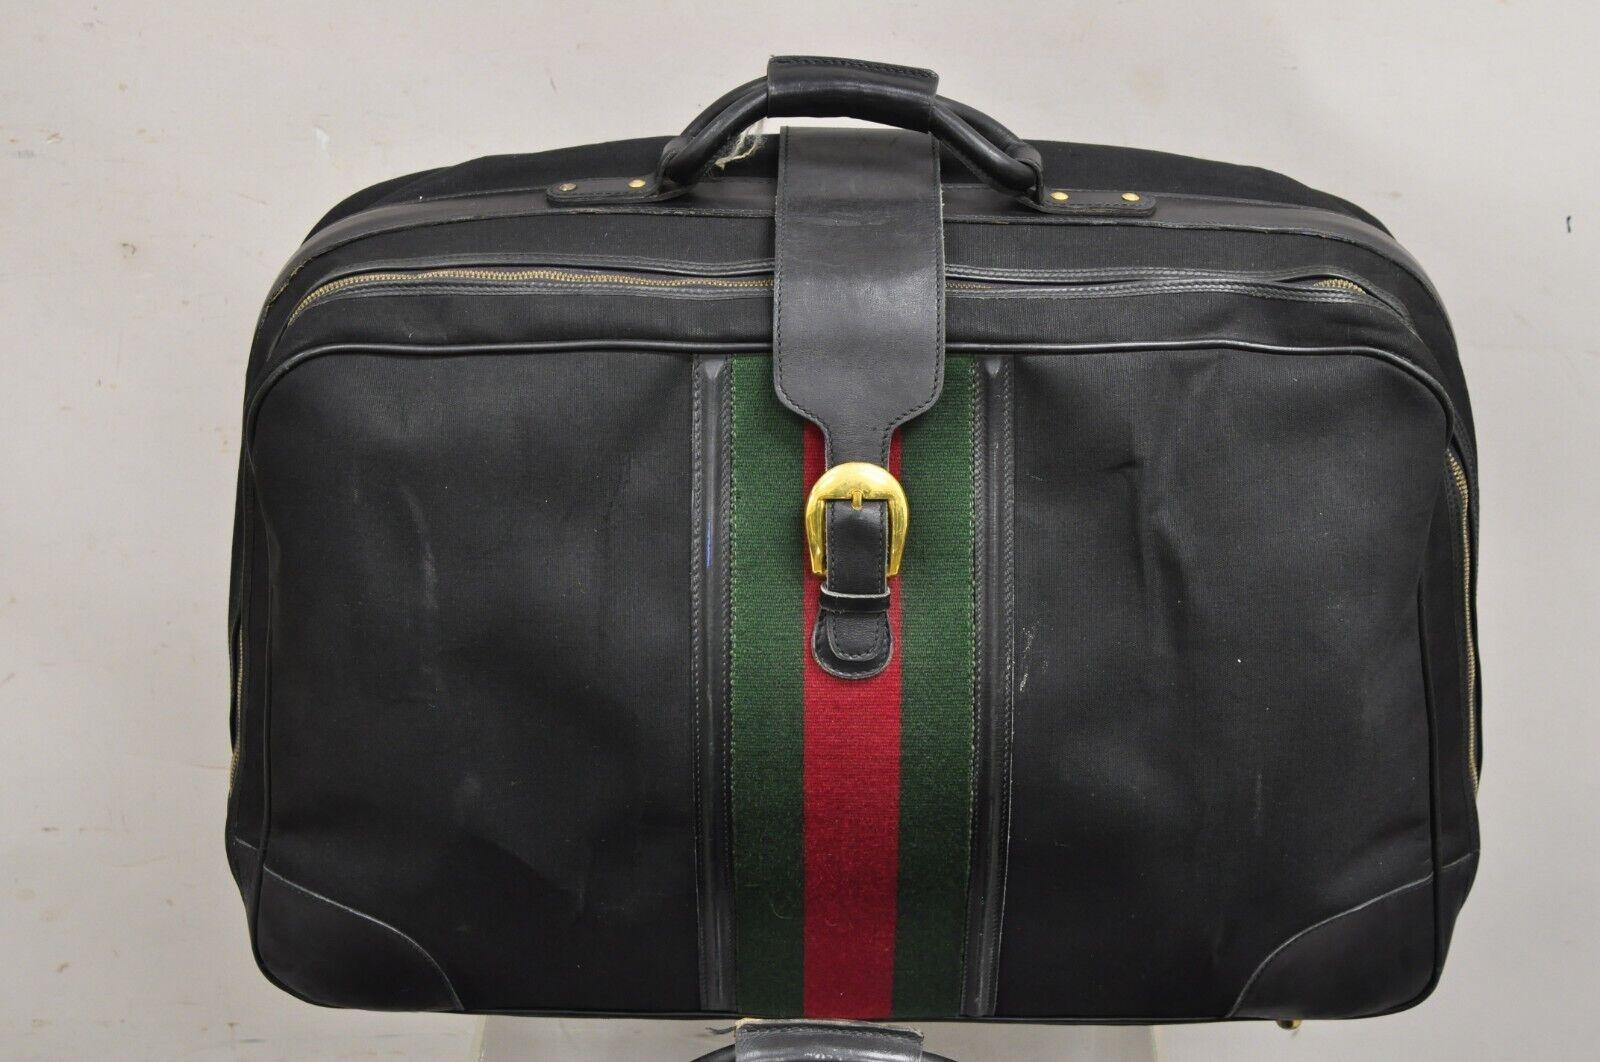 Vintage Gucci Black Canvas and Leather Suitcase Luggage His and Hers Set - 2 Pcs (A). Item featured is an original vintage Gucci luggage, one larger and one smaller suitcase, gold gilt 